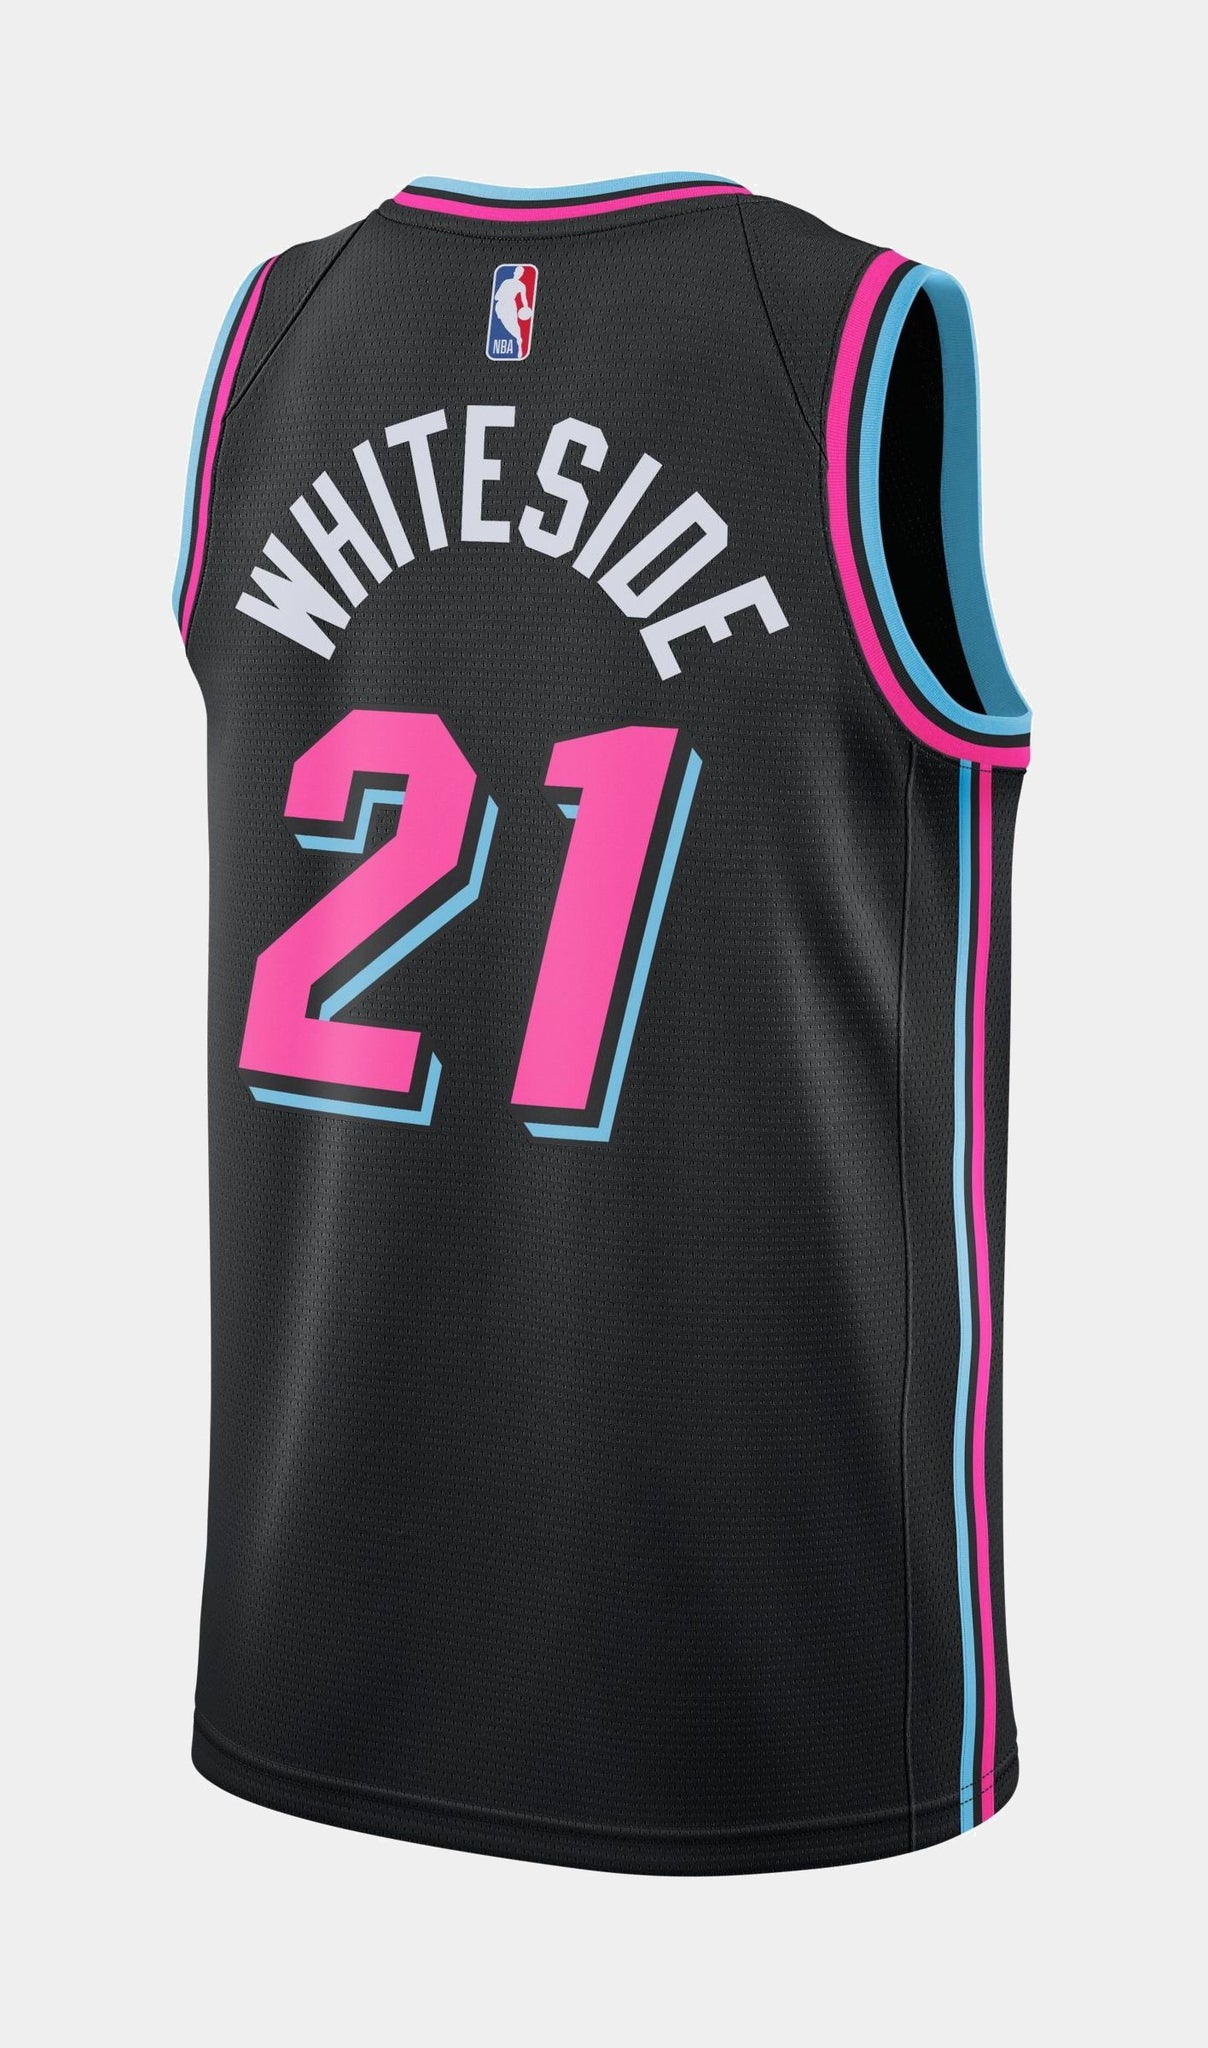 Hassan Whiteside Miami Heat adidas Finished Authentic Jersey - Red